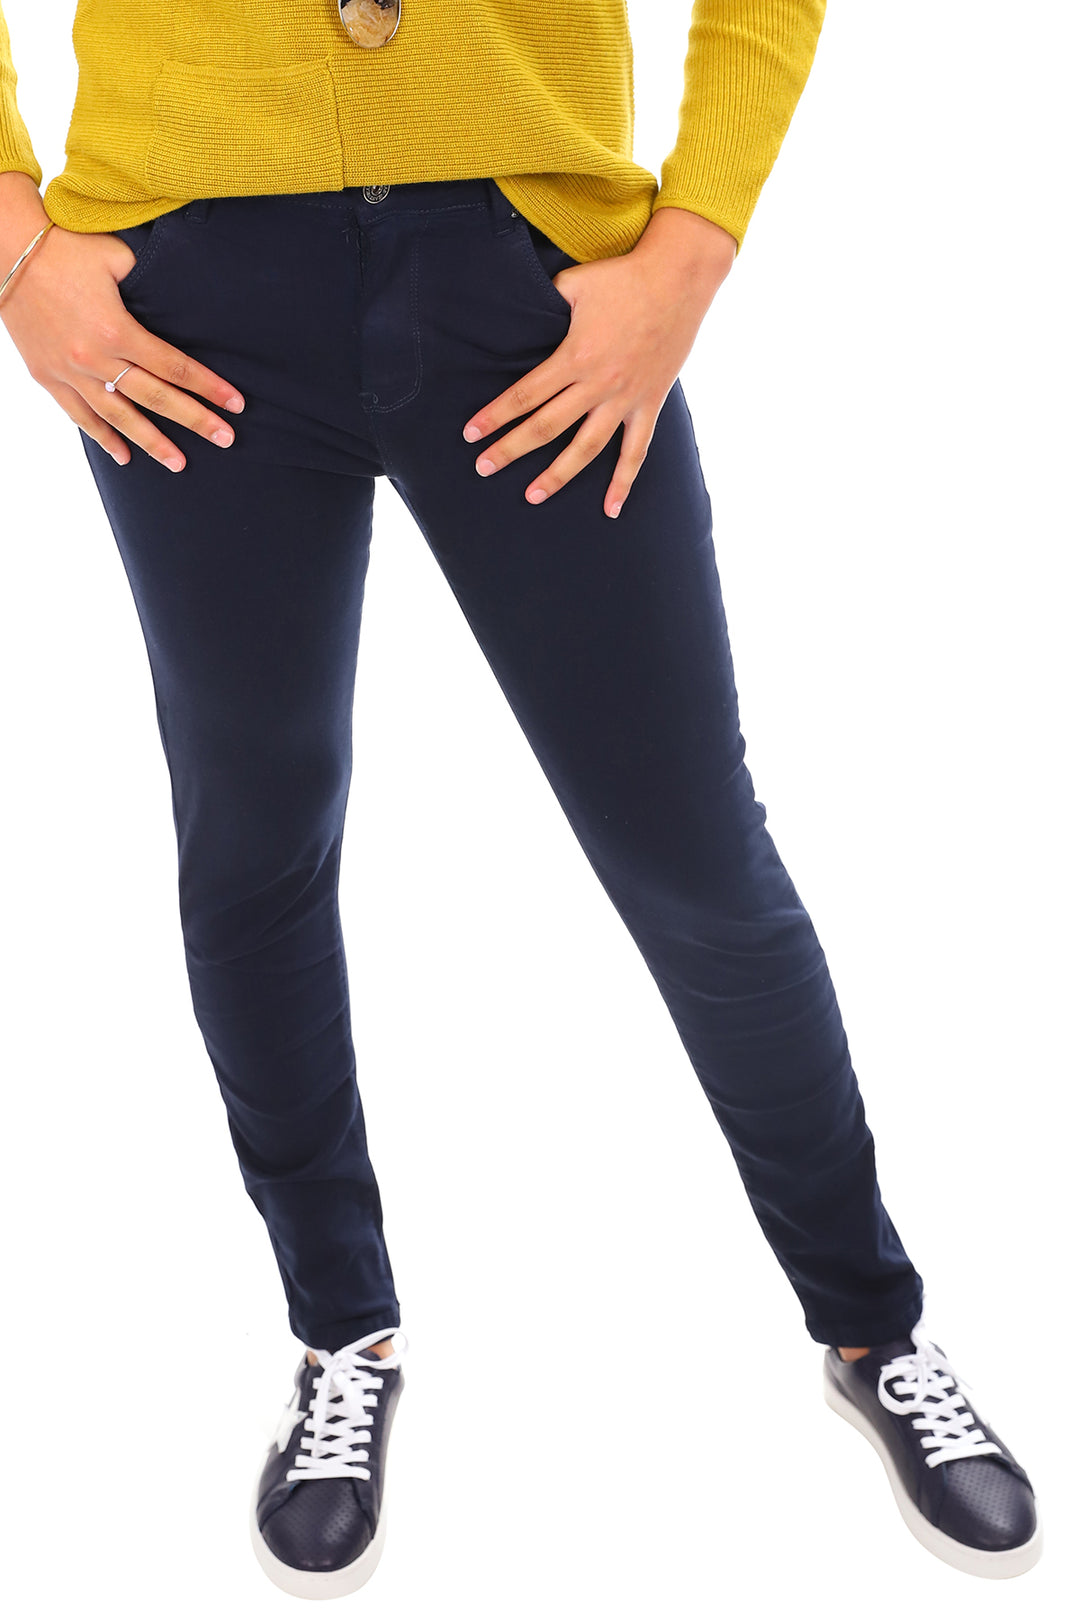 Ana and Lucy high rise jeans in navy, sold and shipped from Pizazz Boutique Nelson Bay women's dresses online Australia